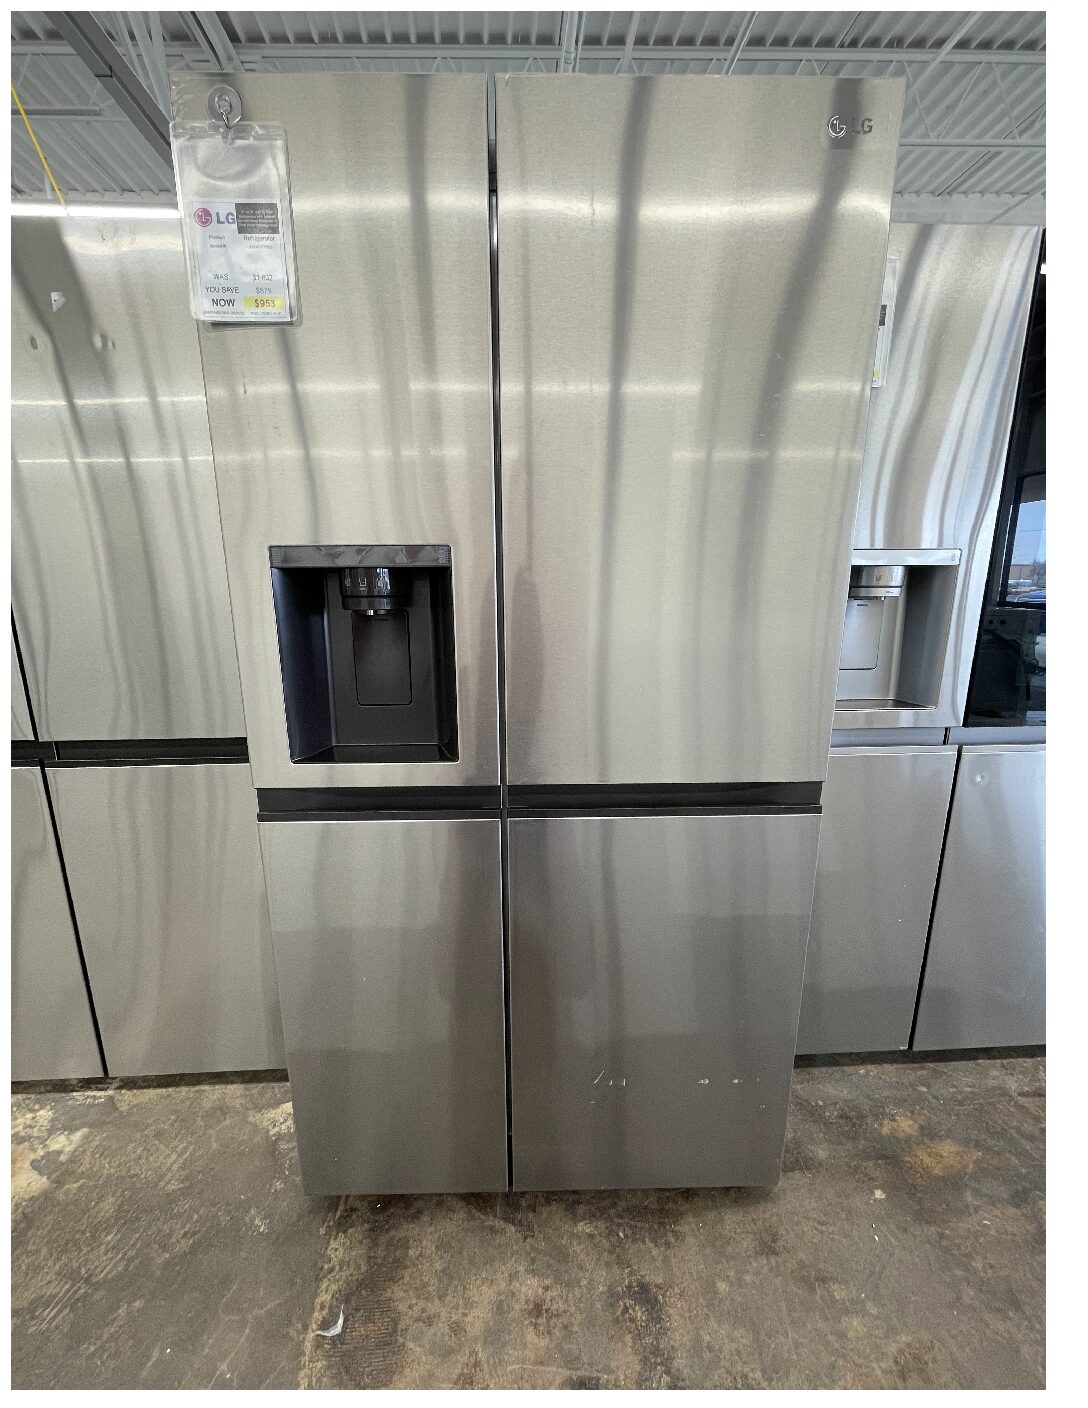 Samsung 30 Cu. ft. Mega Capacity 4-Door French Door Refrigerator with Four Types of Ice in Stainless Steel